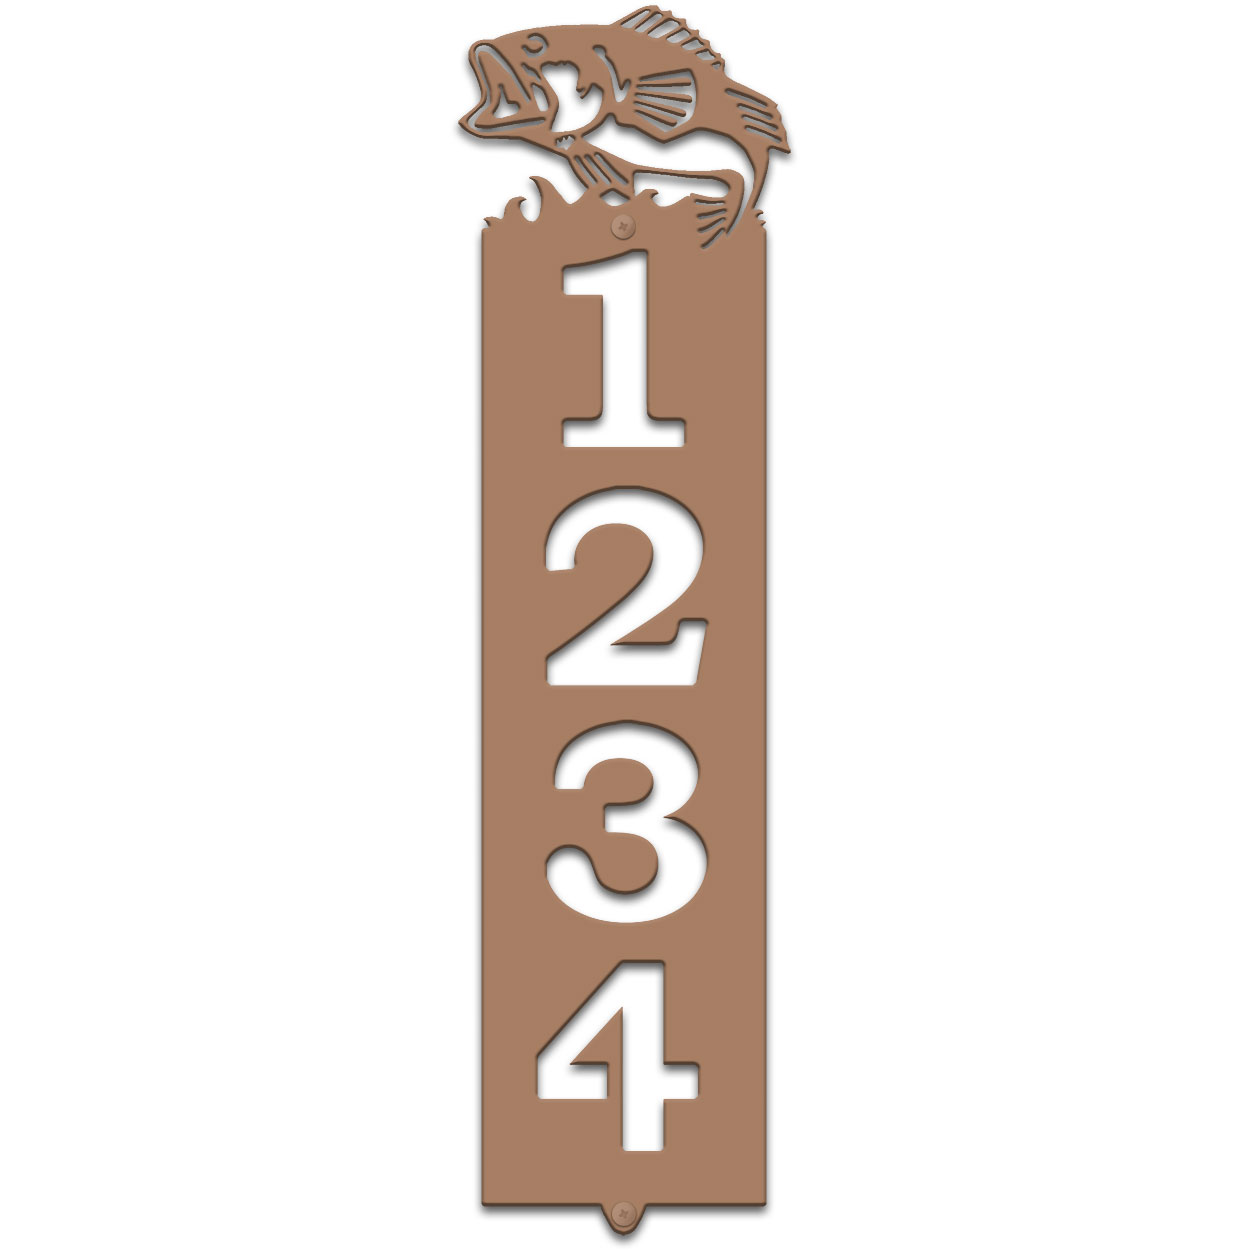 635004 - Bass Cut Outs Four Digit Address Number Plaque